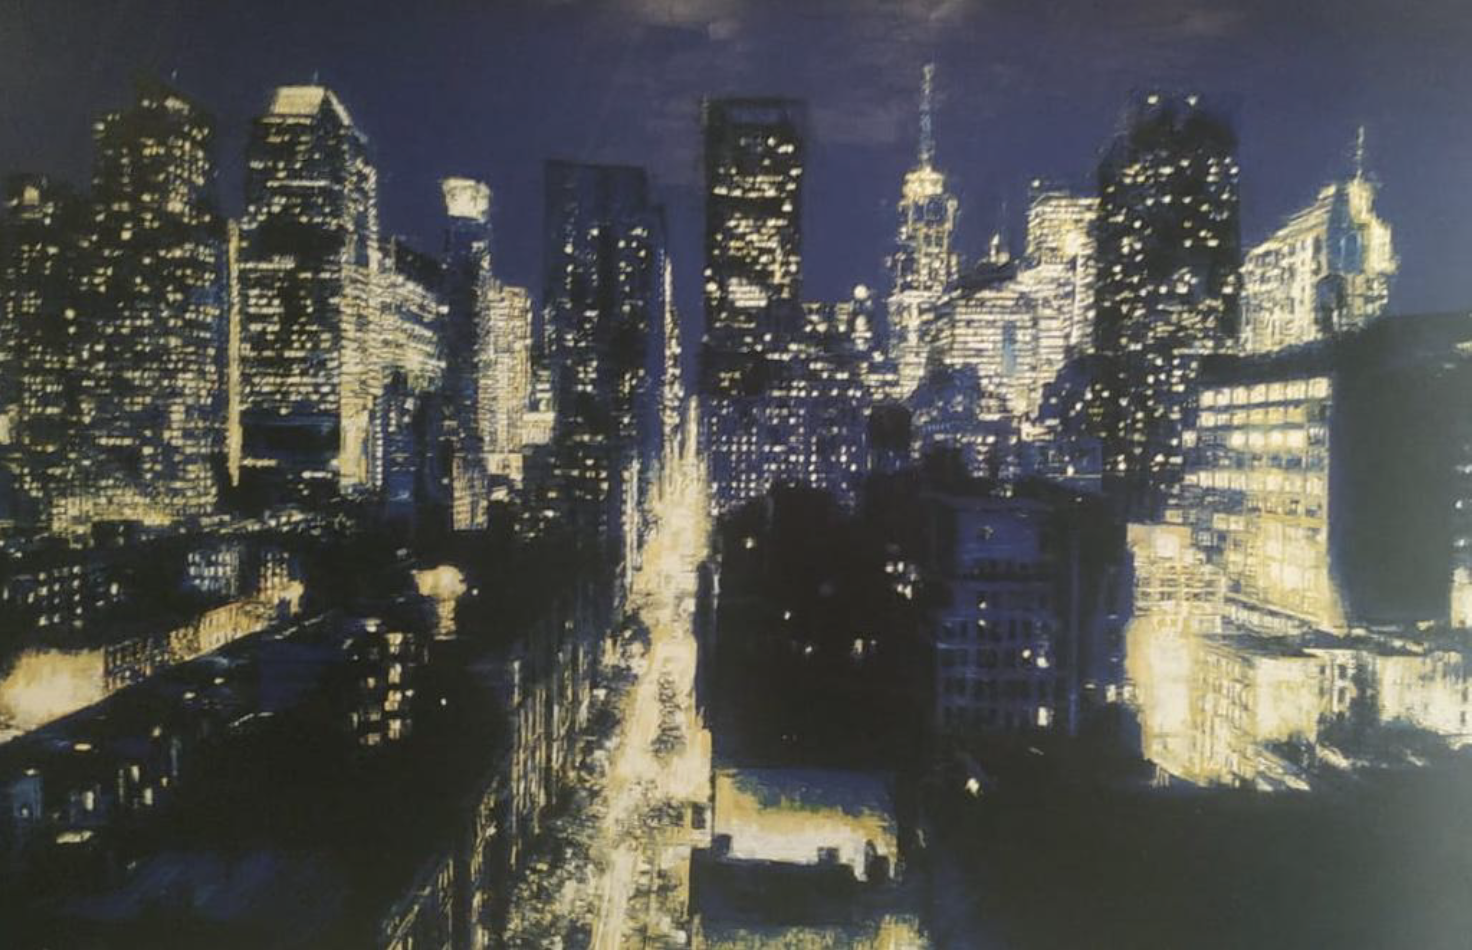 Title: New York<br />
Dimensions: 150 cm x 210 cm<br />
Material: Oil on wooden panel<br />
